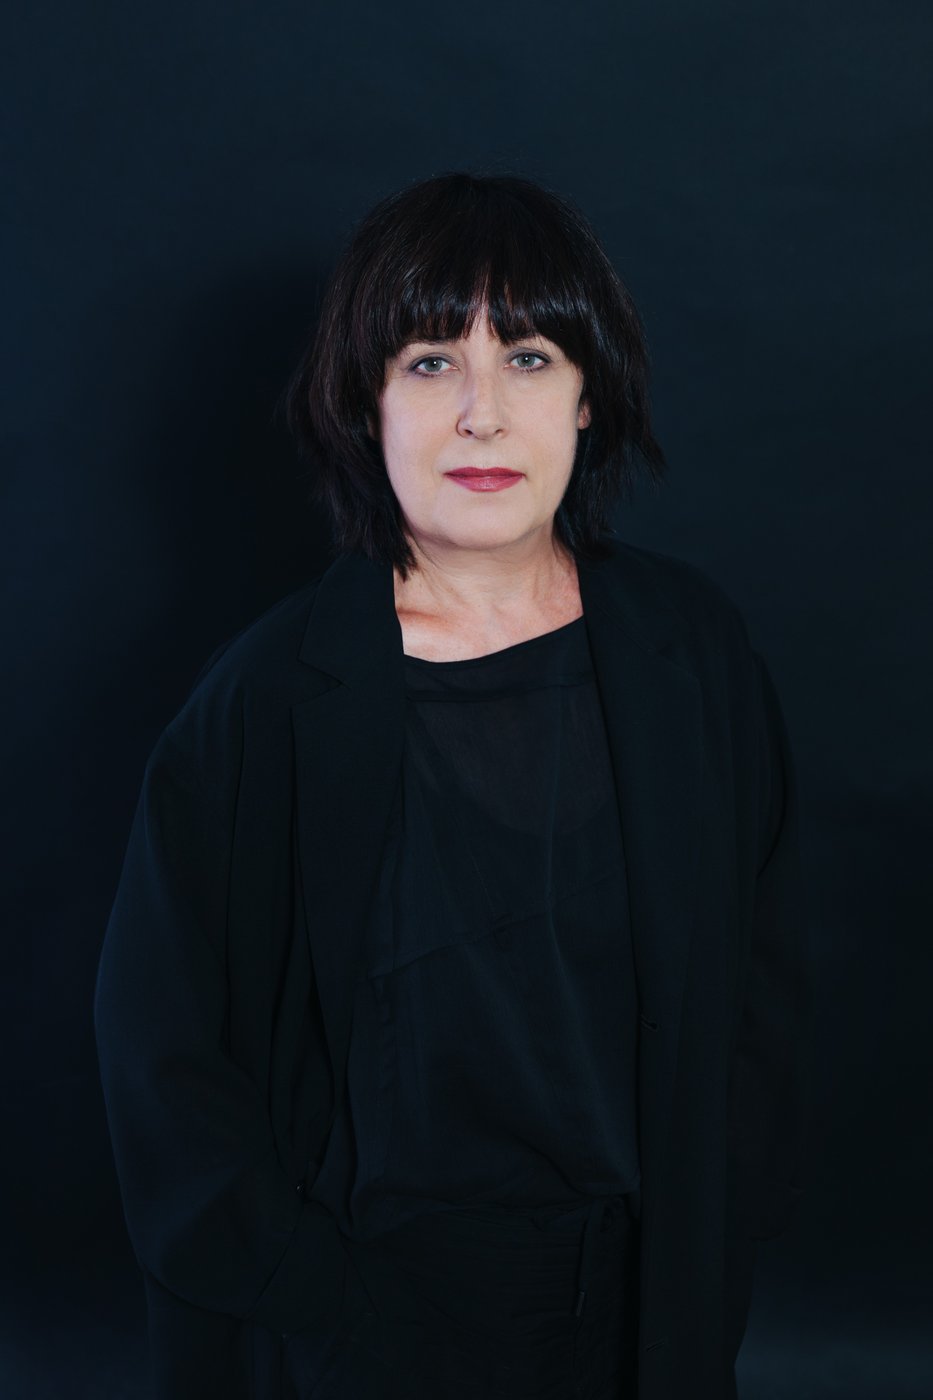 Rektor Johan F. Hartle is pleased to announce a future-oriented decision for the Academy: Sabine Folie will take over as Director of the Art Collections of the Academy of Fine Arts Vienna from January 2022